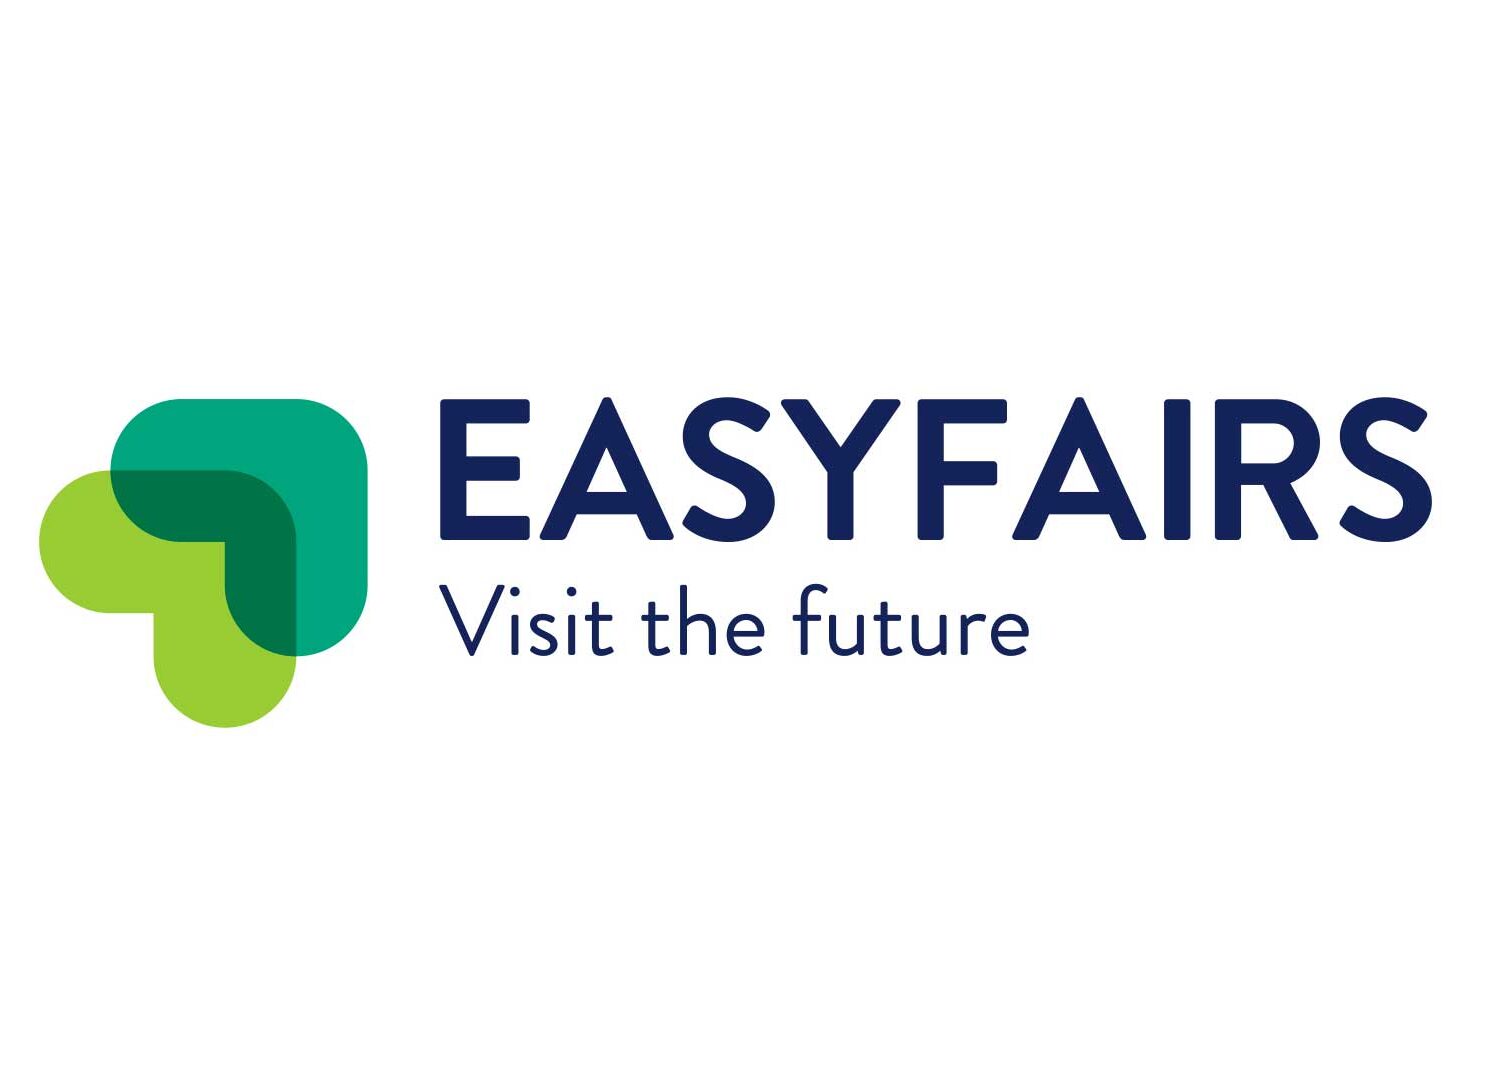 Easy Fairs - Gorinchem - Optreden coverband Act on Demand